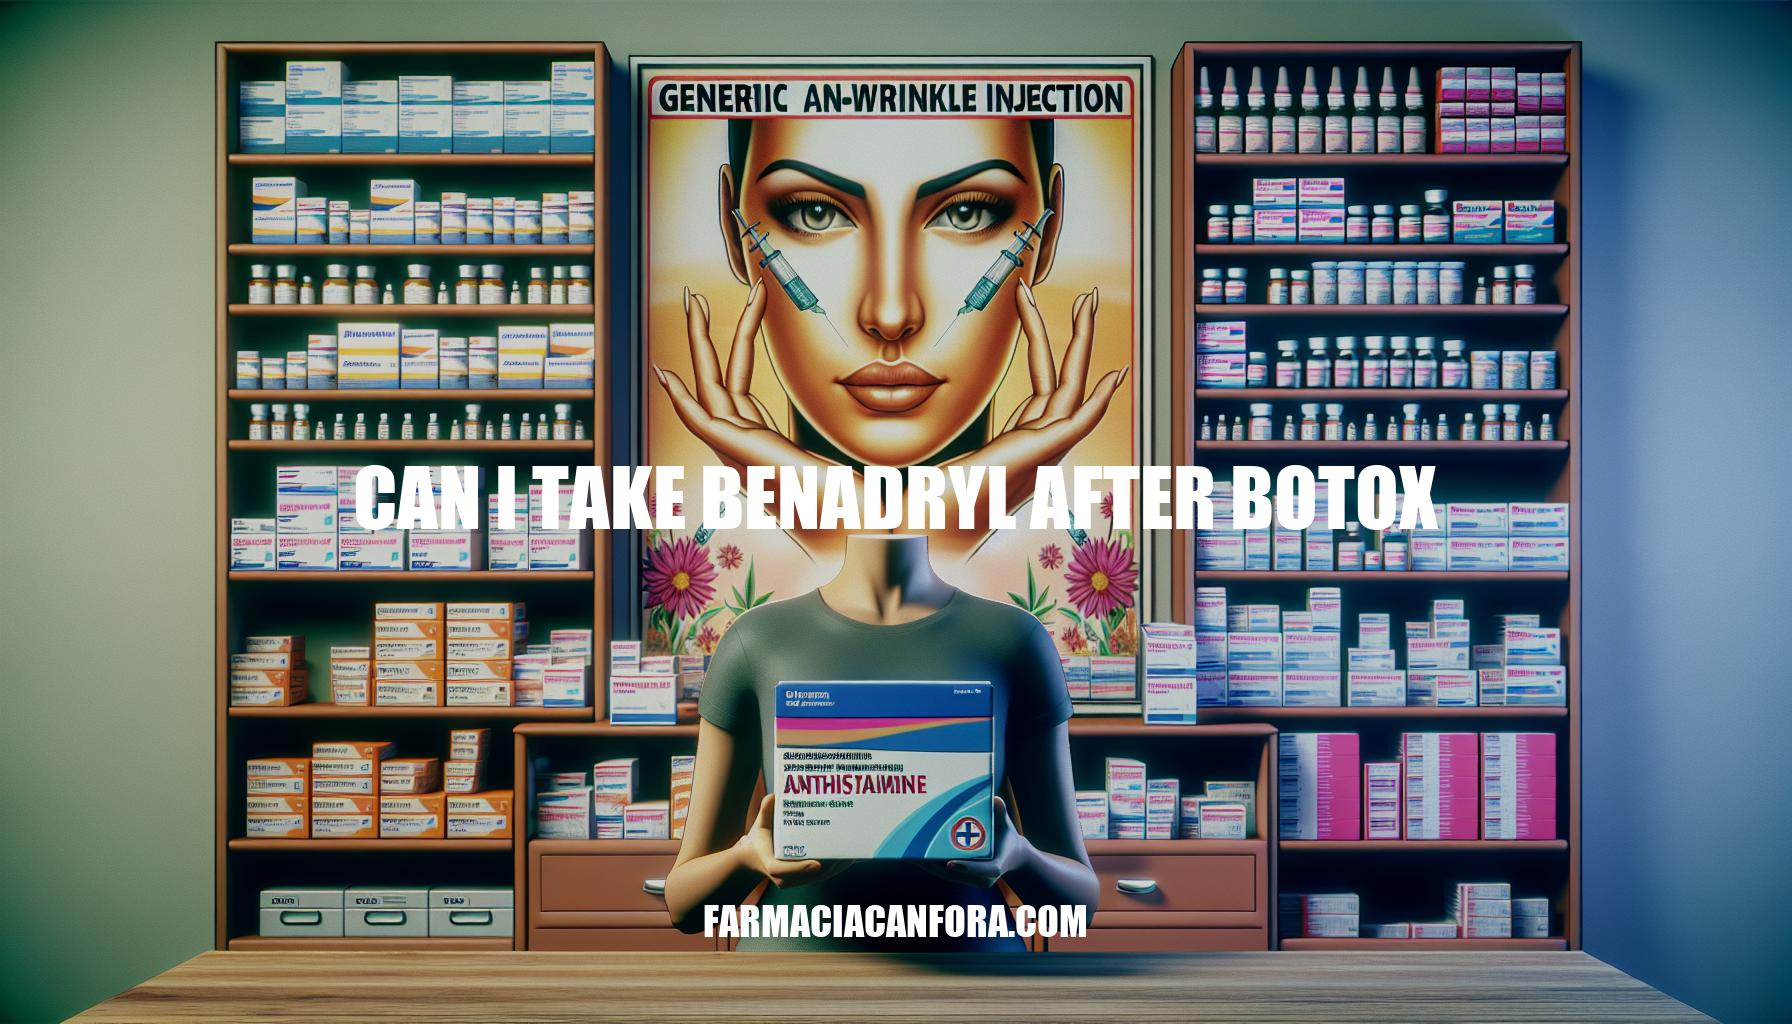 Can I Take Benadryl After Botox: Safety Considerations and Dosage Guide